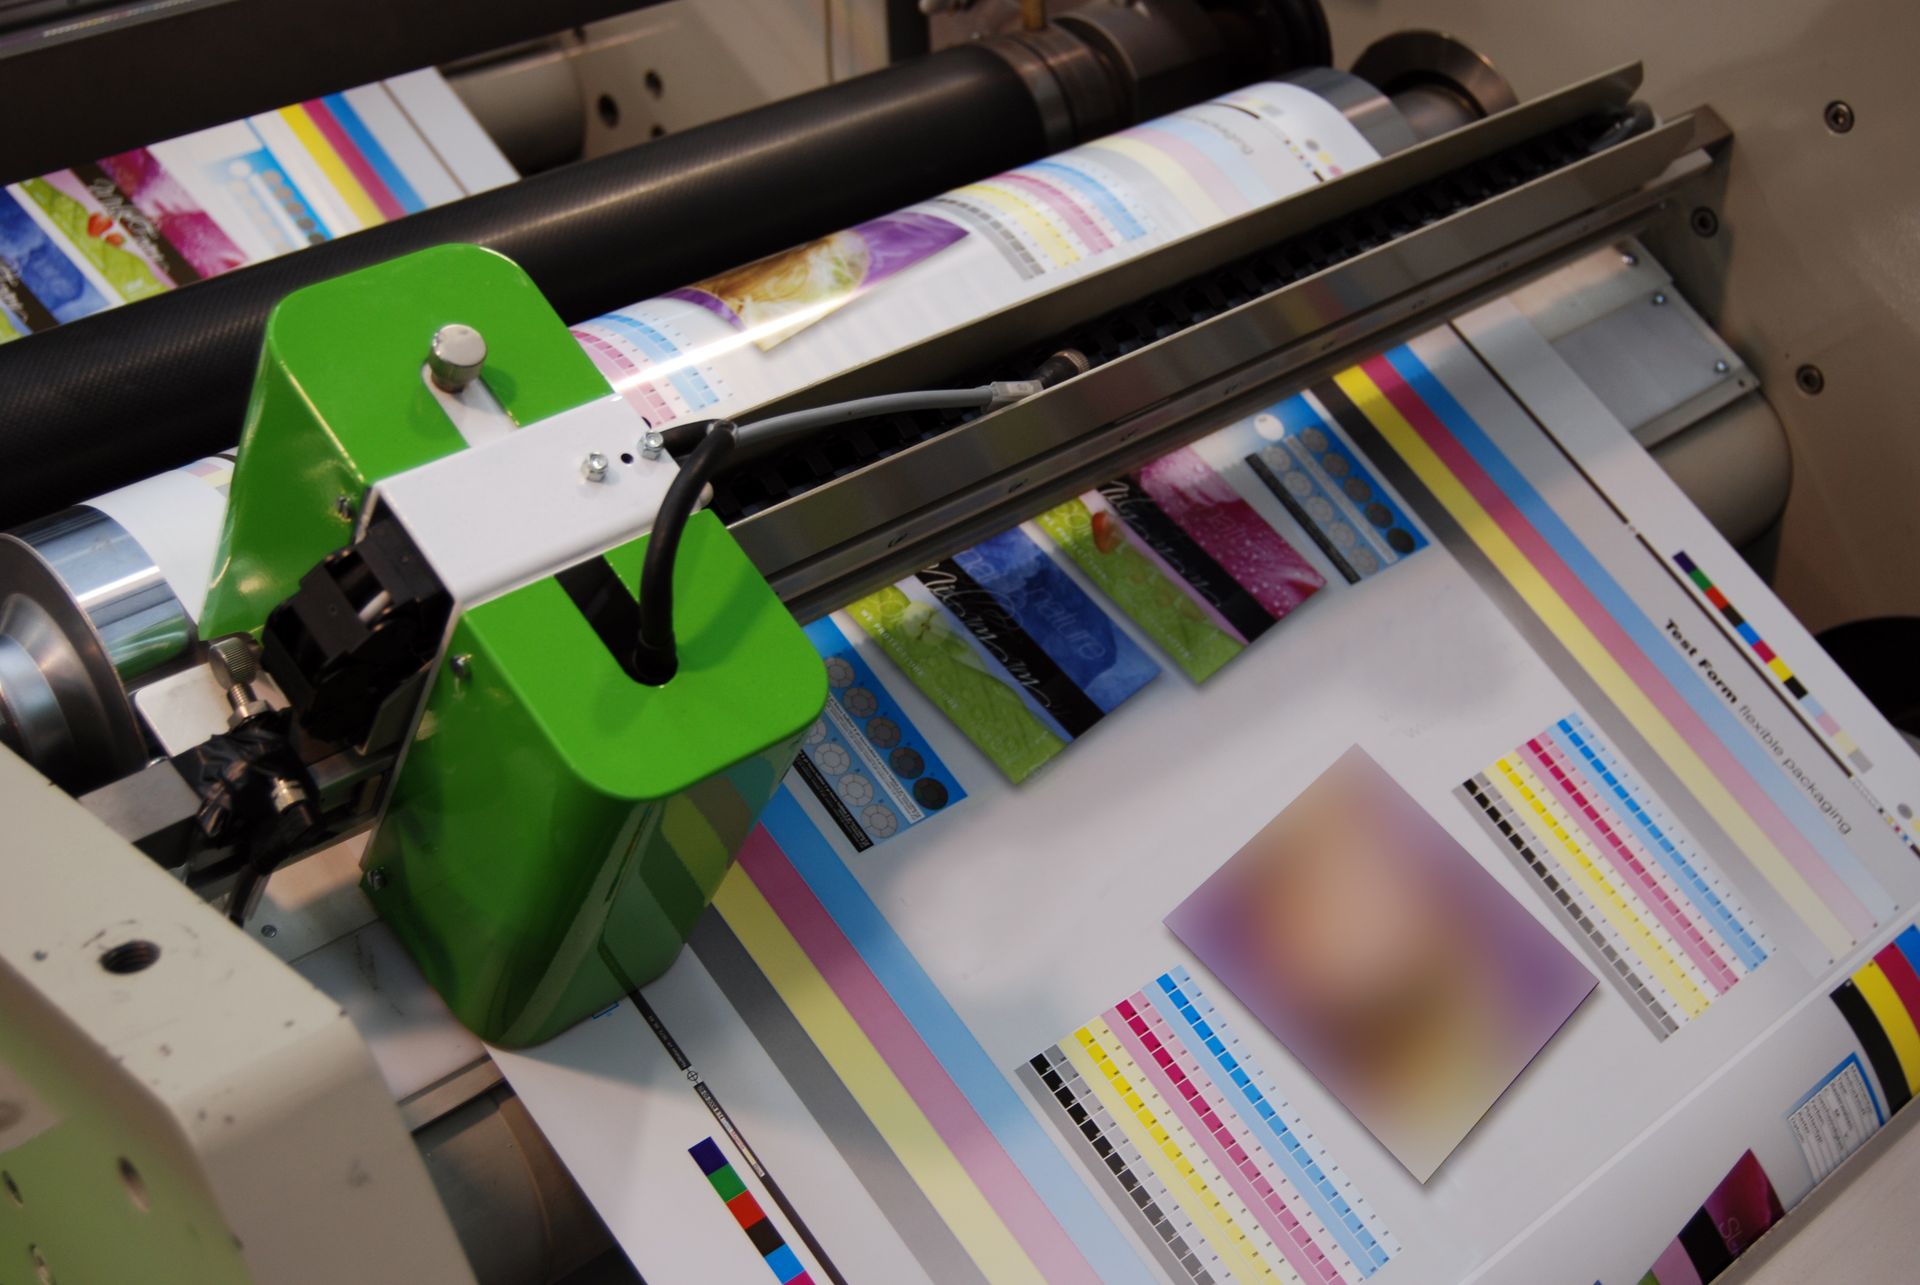 Professional Printing Services: Personalized Printing, Digital Printing, Leaflets Printing, Booklets Printing, Marketing Collateral Printing, Exhibition Materials Printing and Production, Premium Logo Printing and more...